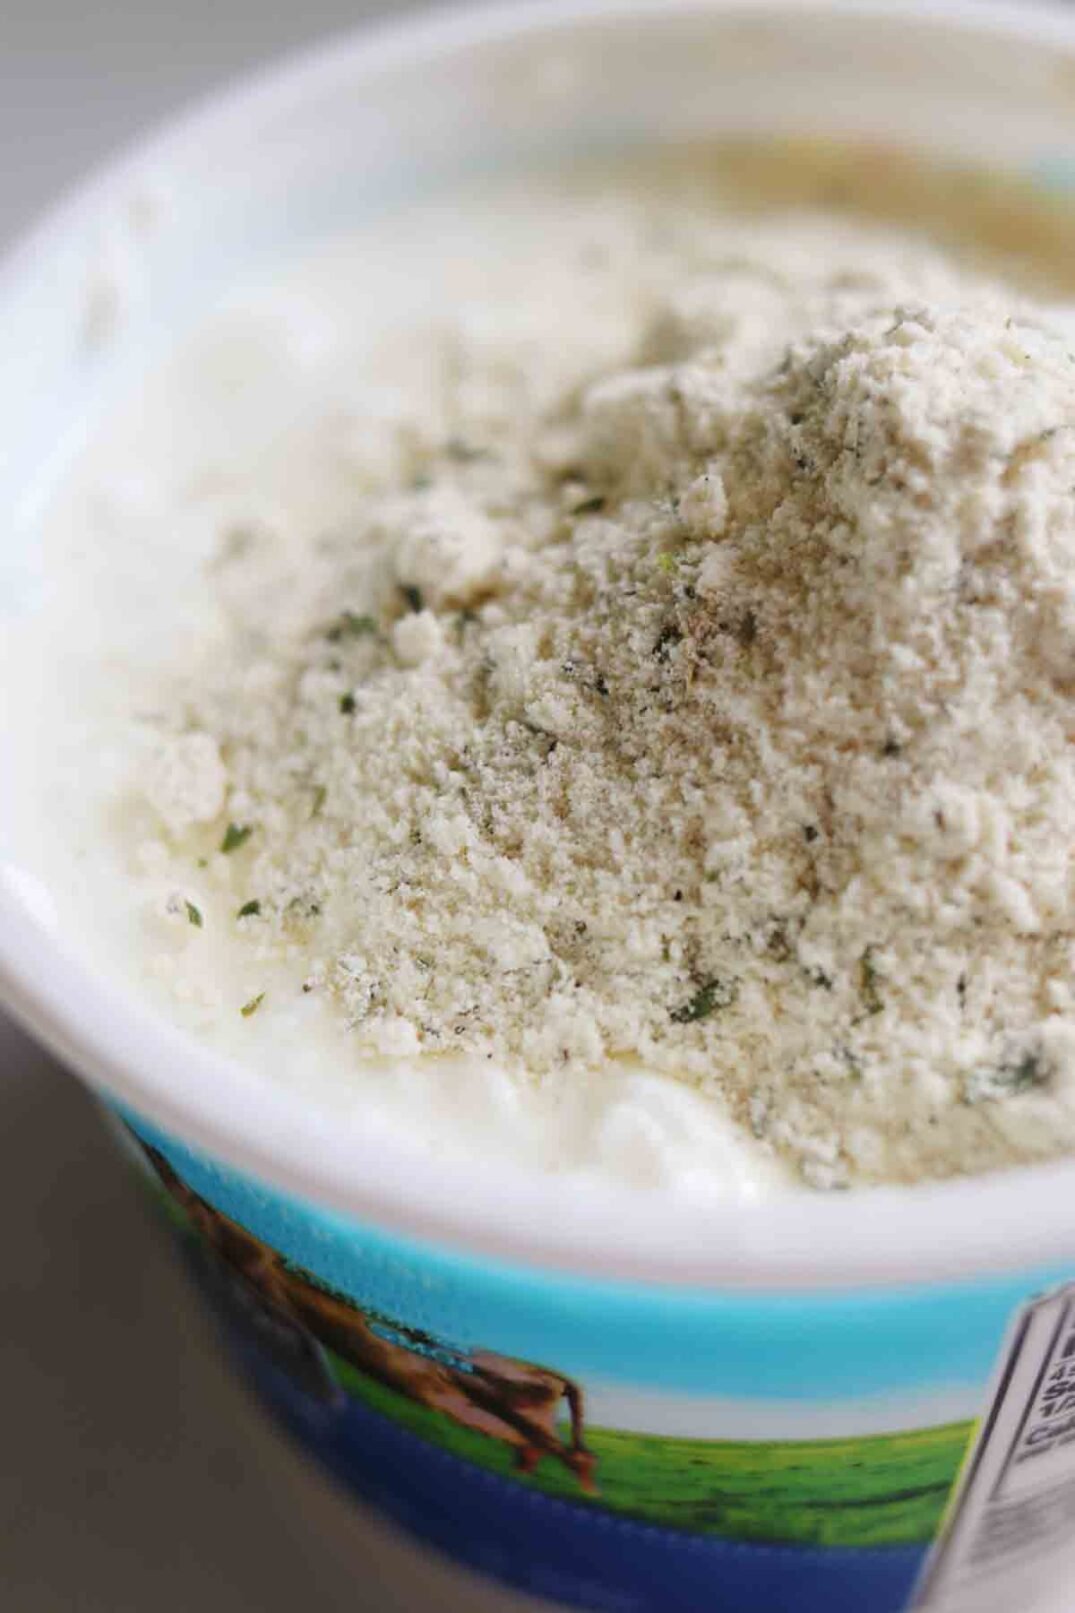 ranch seasoning on top of a container of cottage cheese.